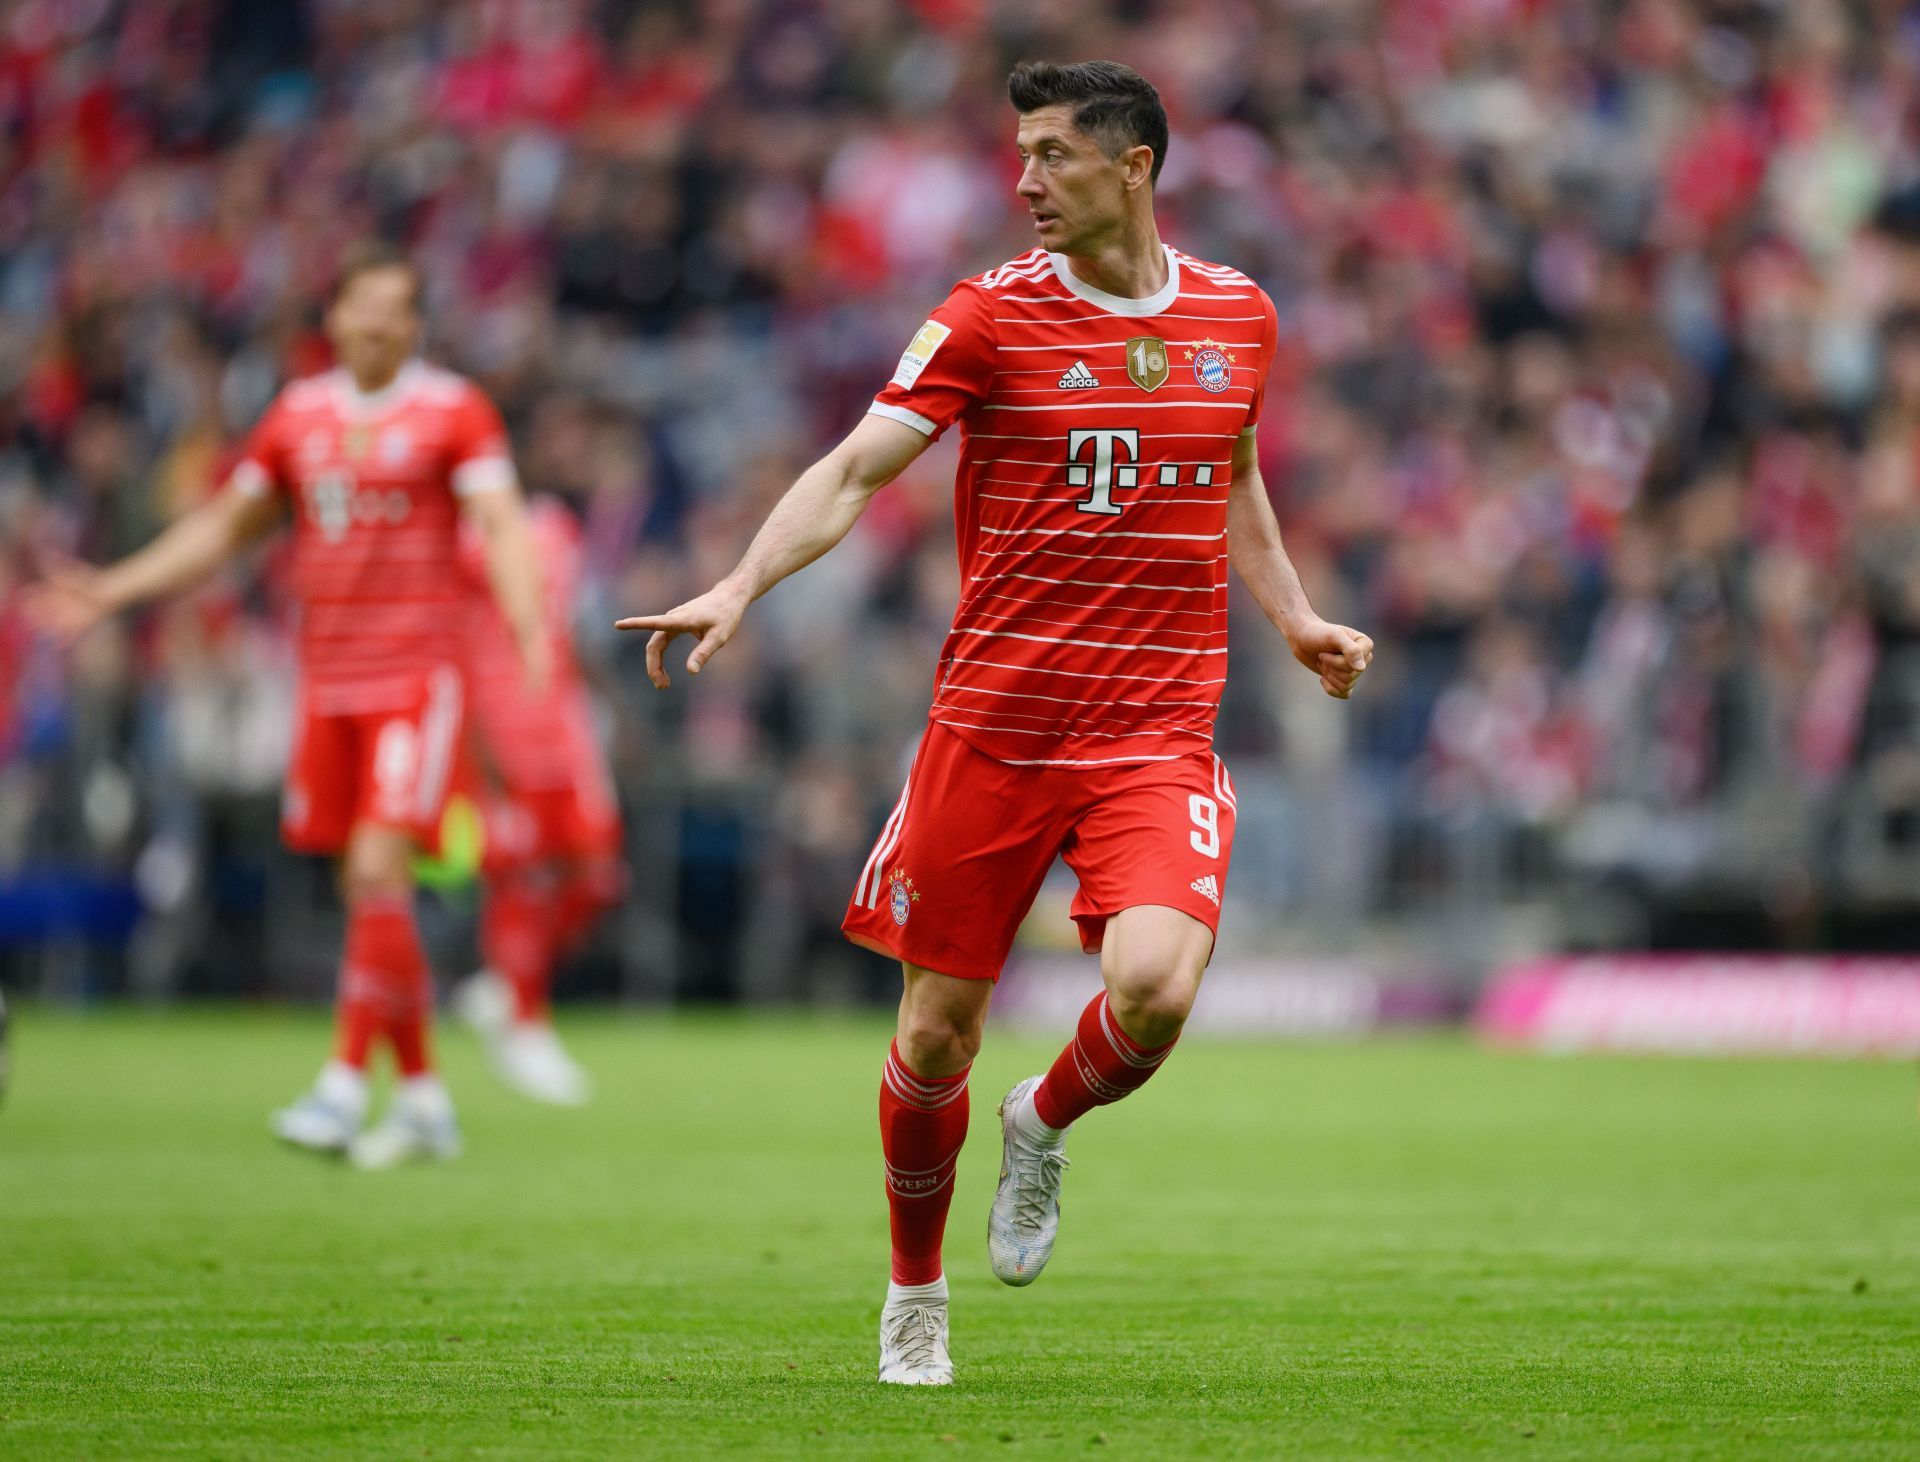 Robert Lewandowski is planning to move to the Camp Nou.